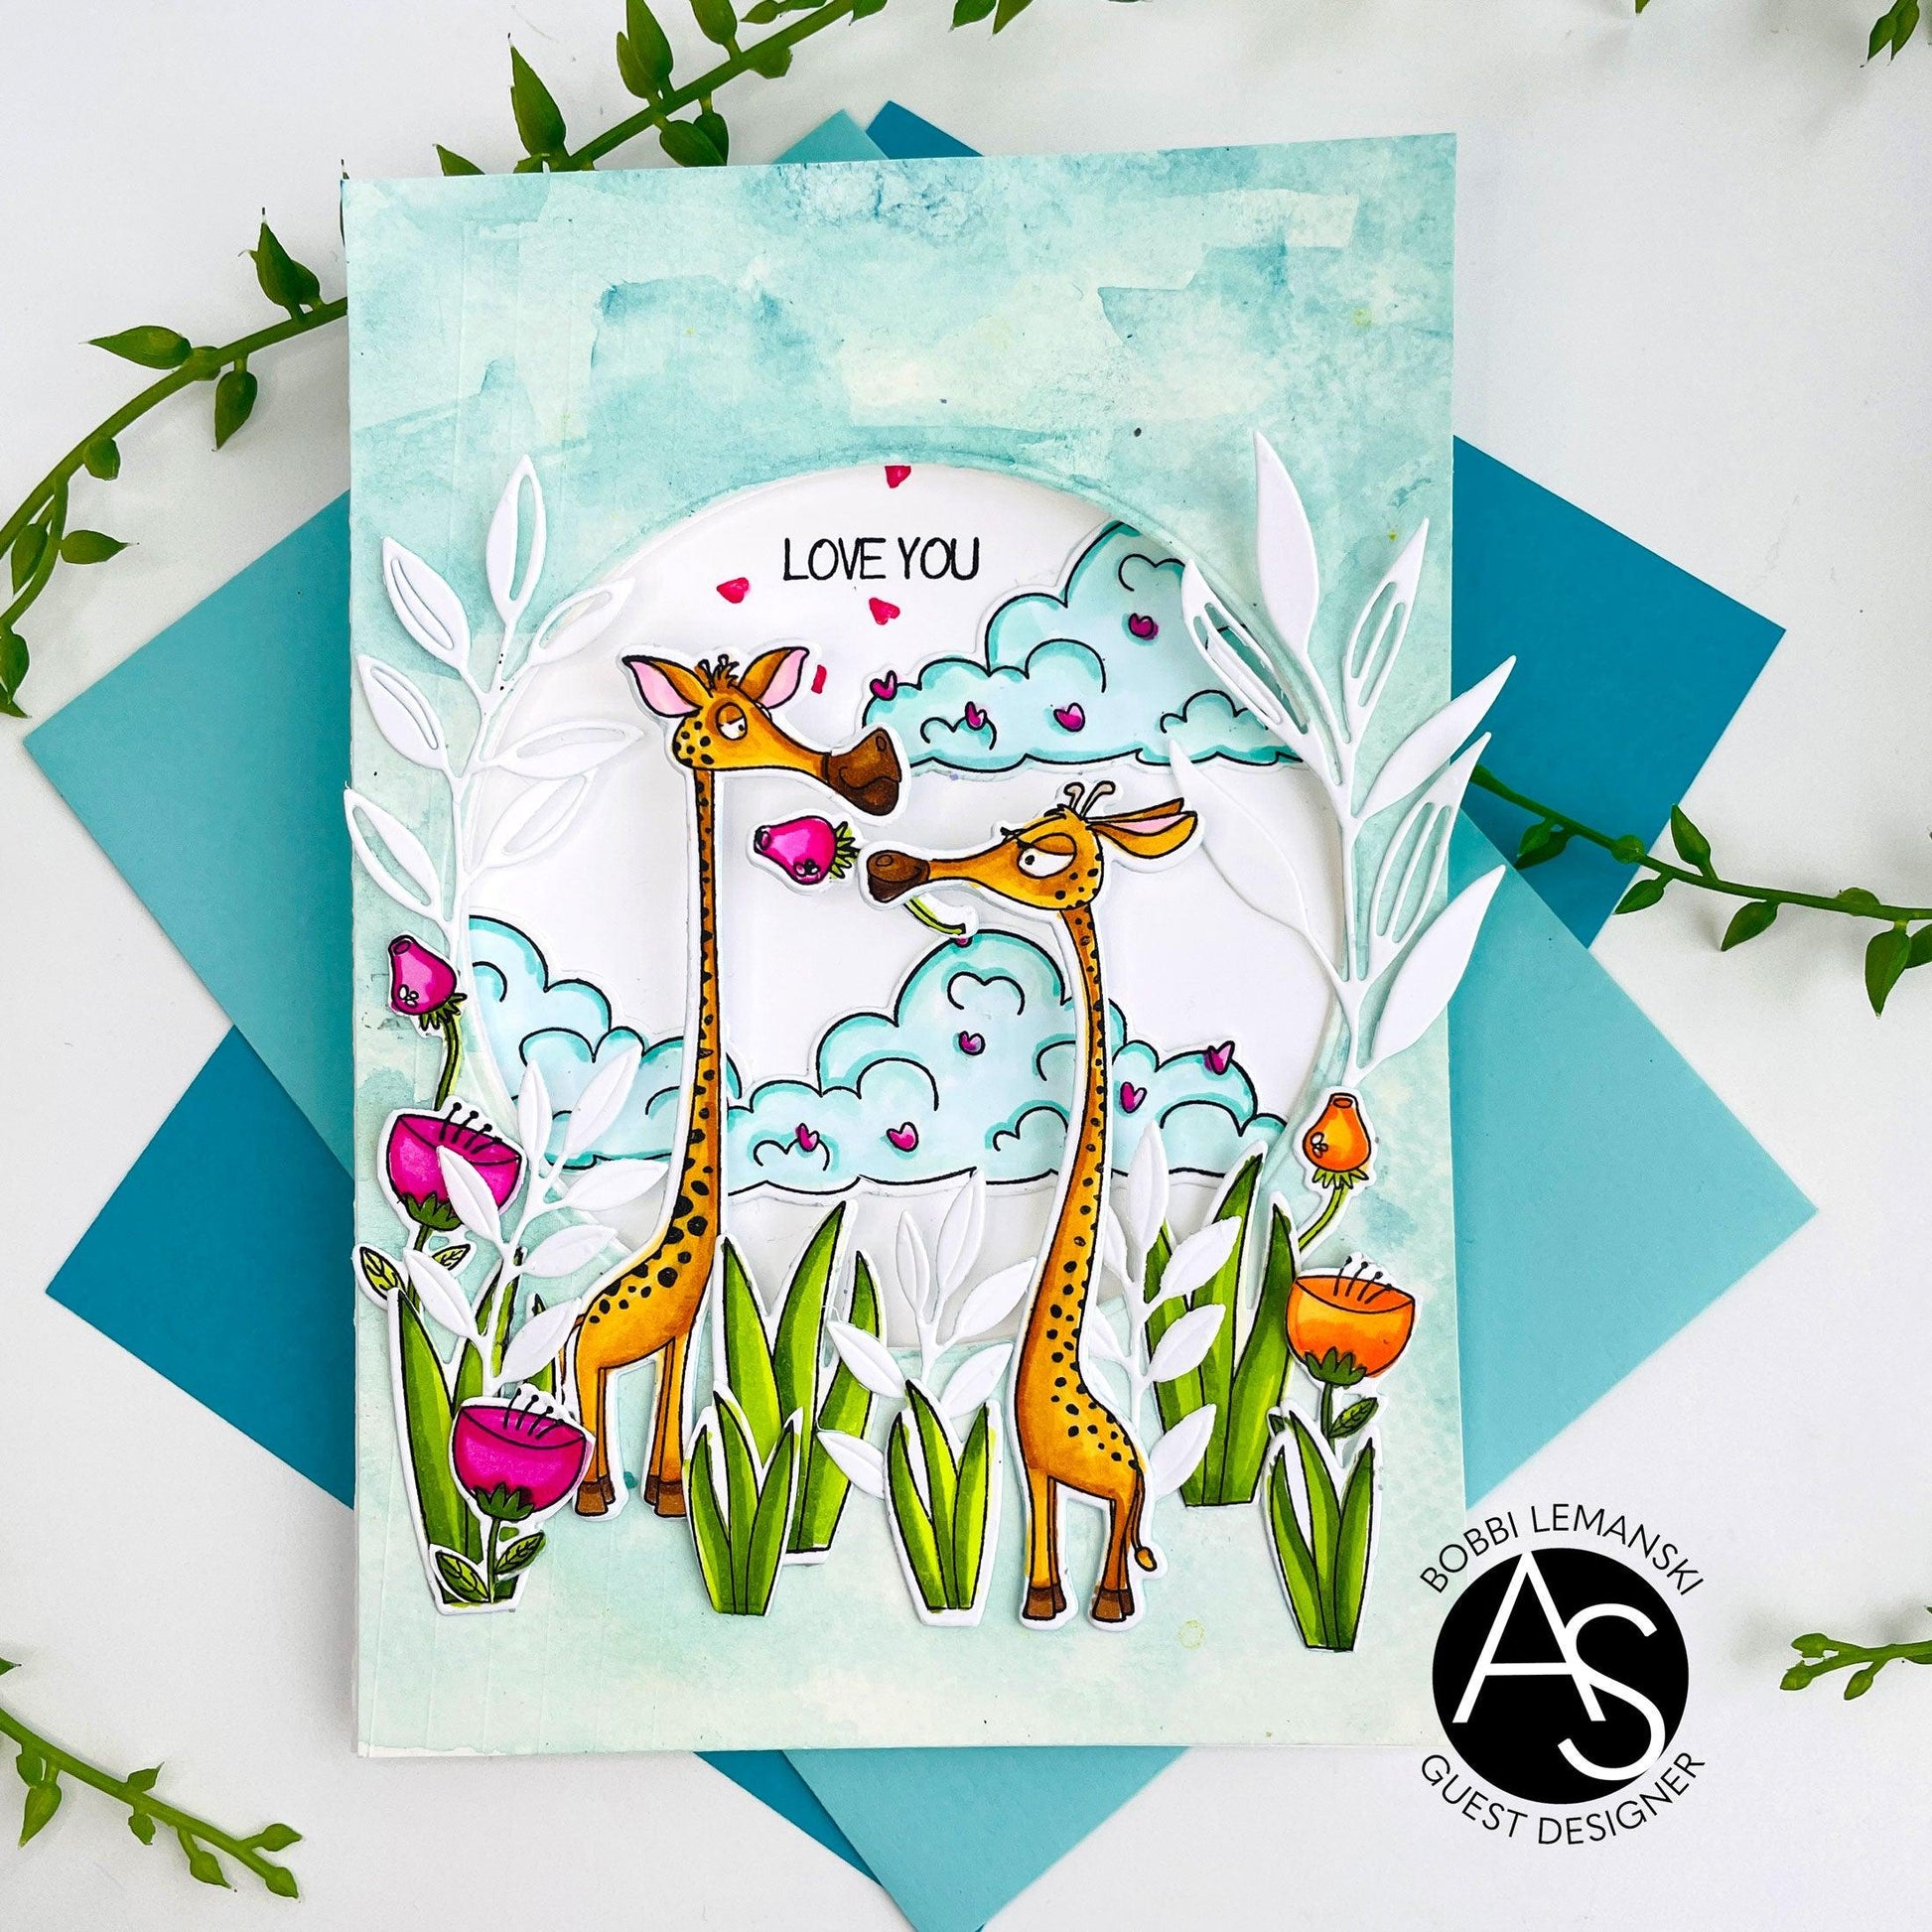 giraffe-stamp-love-you-friends-cardmaking-sentiments-alex-syberia-designs-coloring-valentine-stamps-love-friends-leaves-loveyou-cards